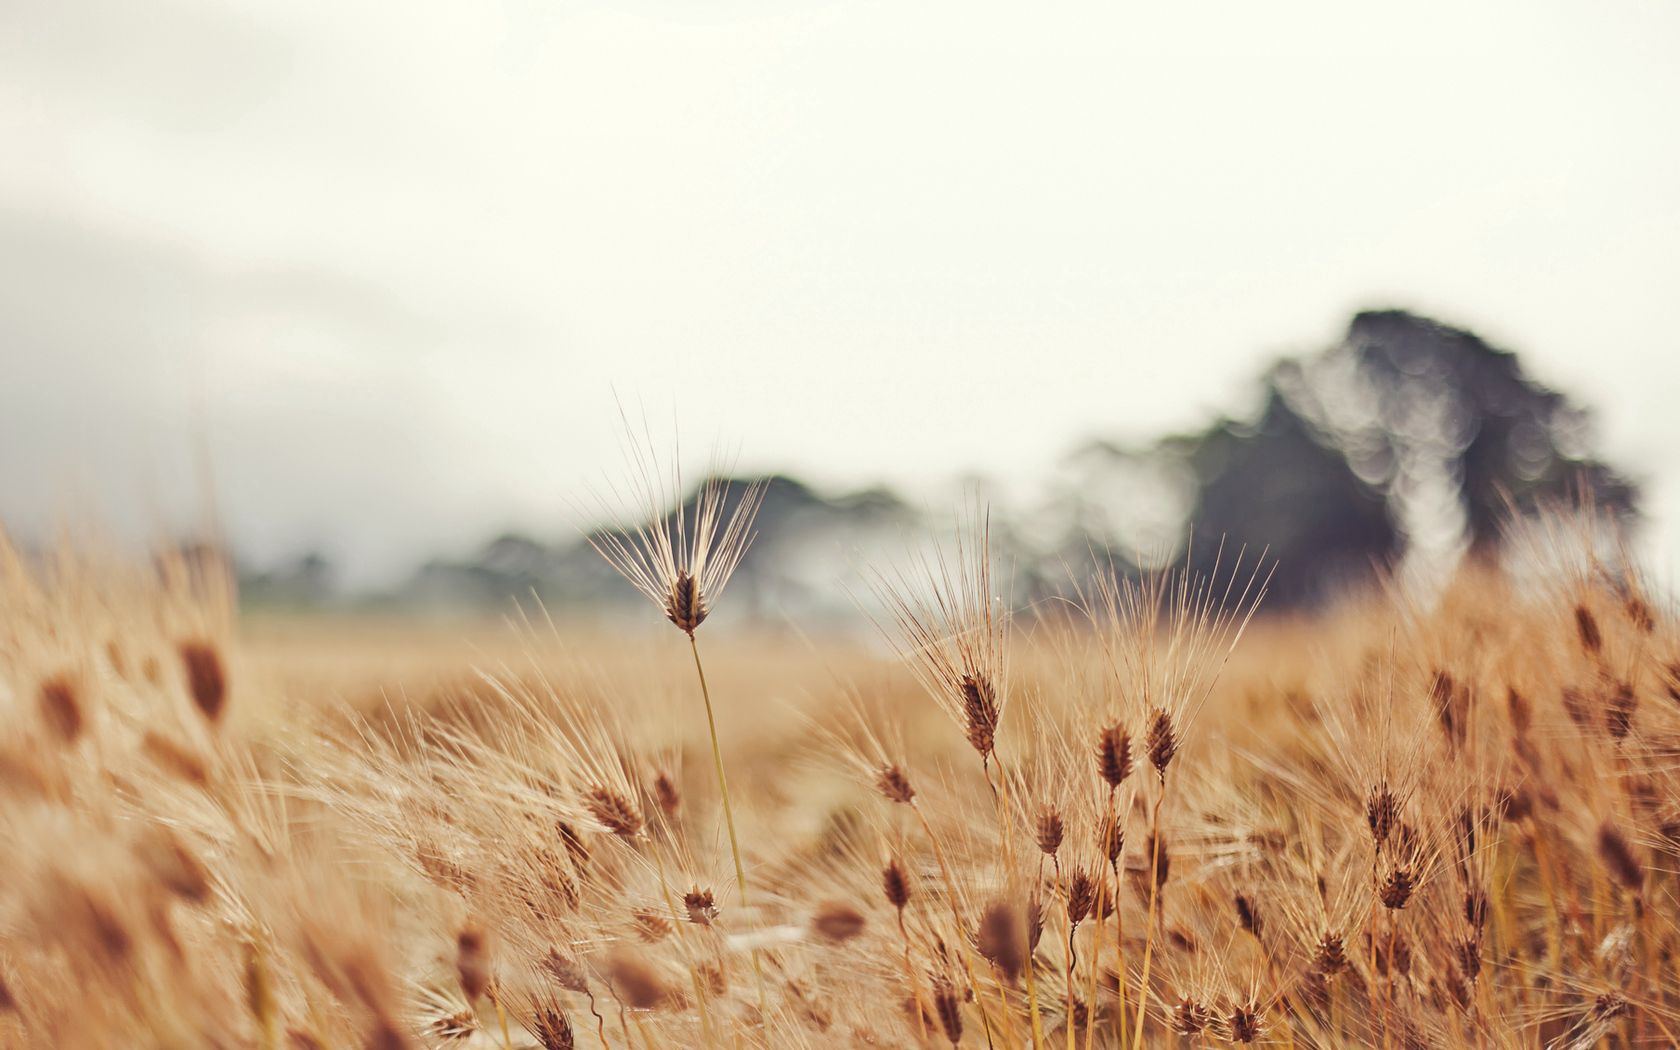 spikes, wheat, nature, blur, ears, mainly cloudy, overcast, mustache, moustache